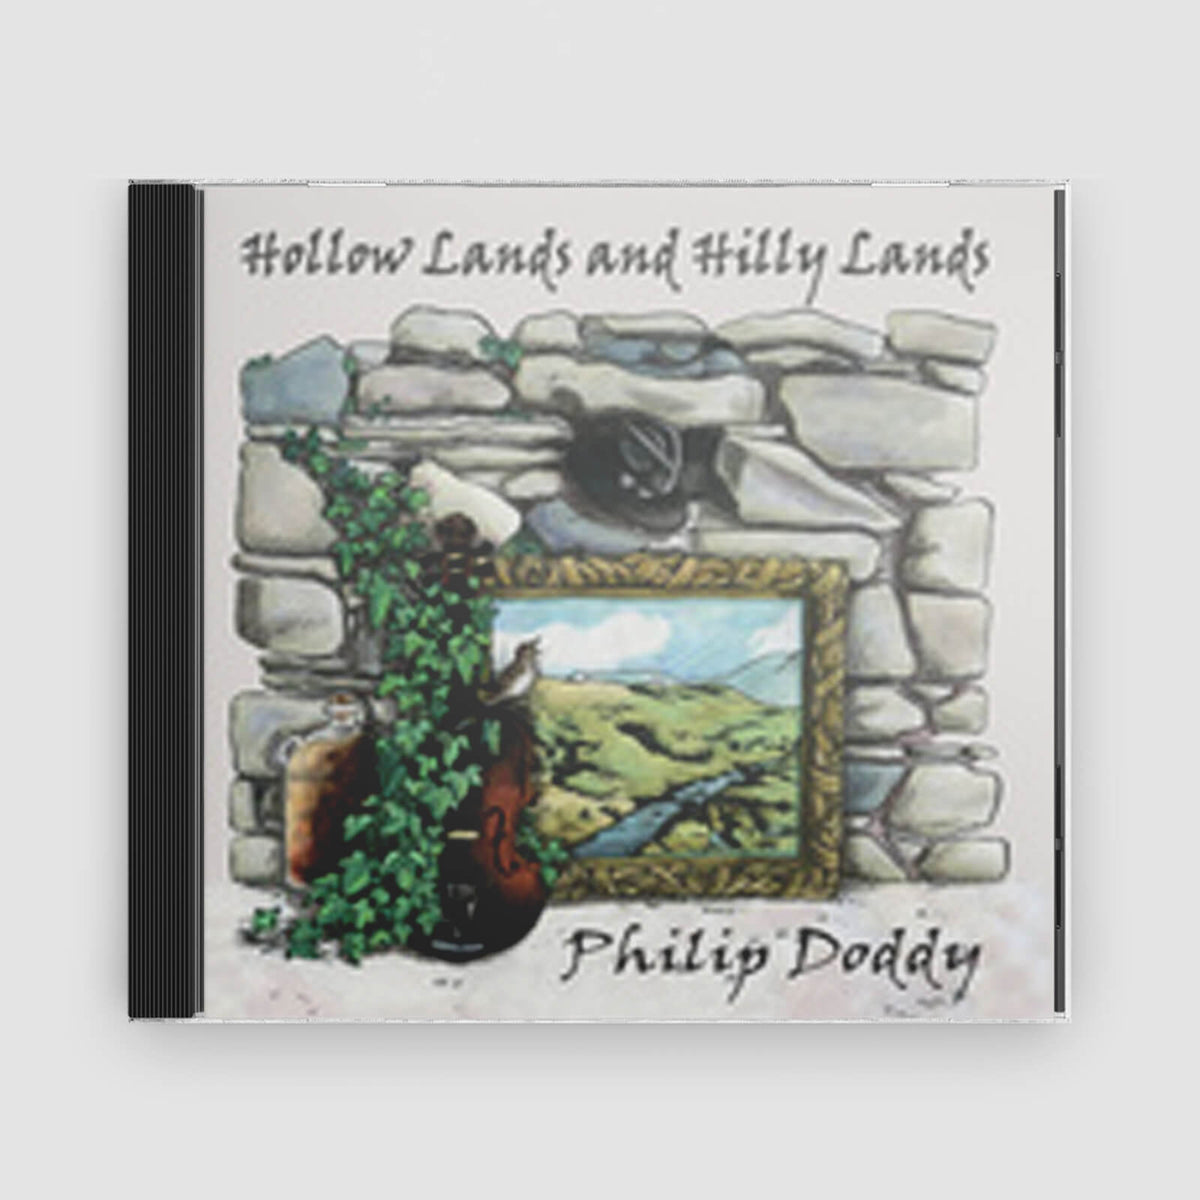 Phillip Doddy : Hollow Lands And Hilly Hills